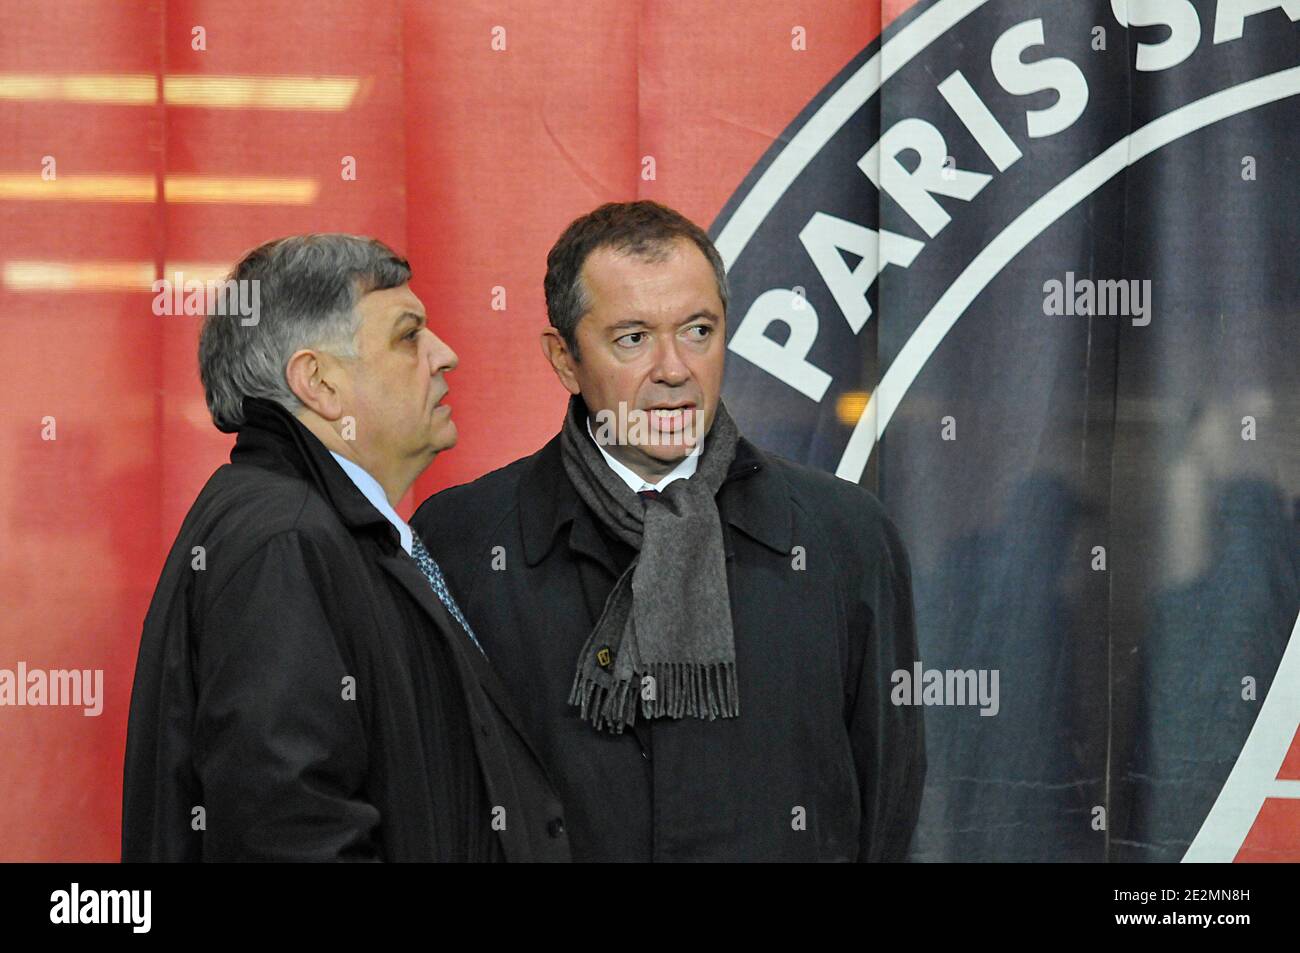 PSG's chairman Robin Leproux during the French First league soccer match, Paris Saint Germain vs Lorient at the Parc des Princes in Paris, France on February 06, 2010. Lorient won 3-0. Photo by Thierry Plessis/ABACAPRESS.COM Stock Photo